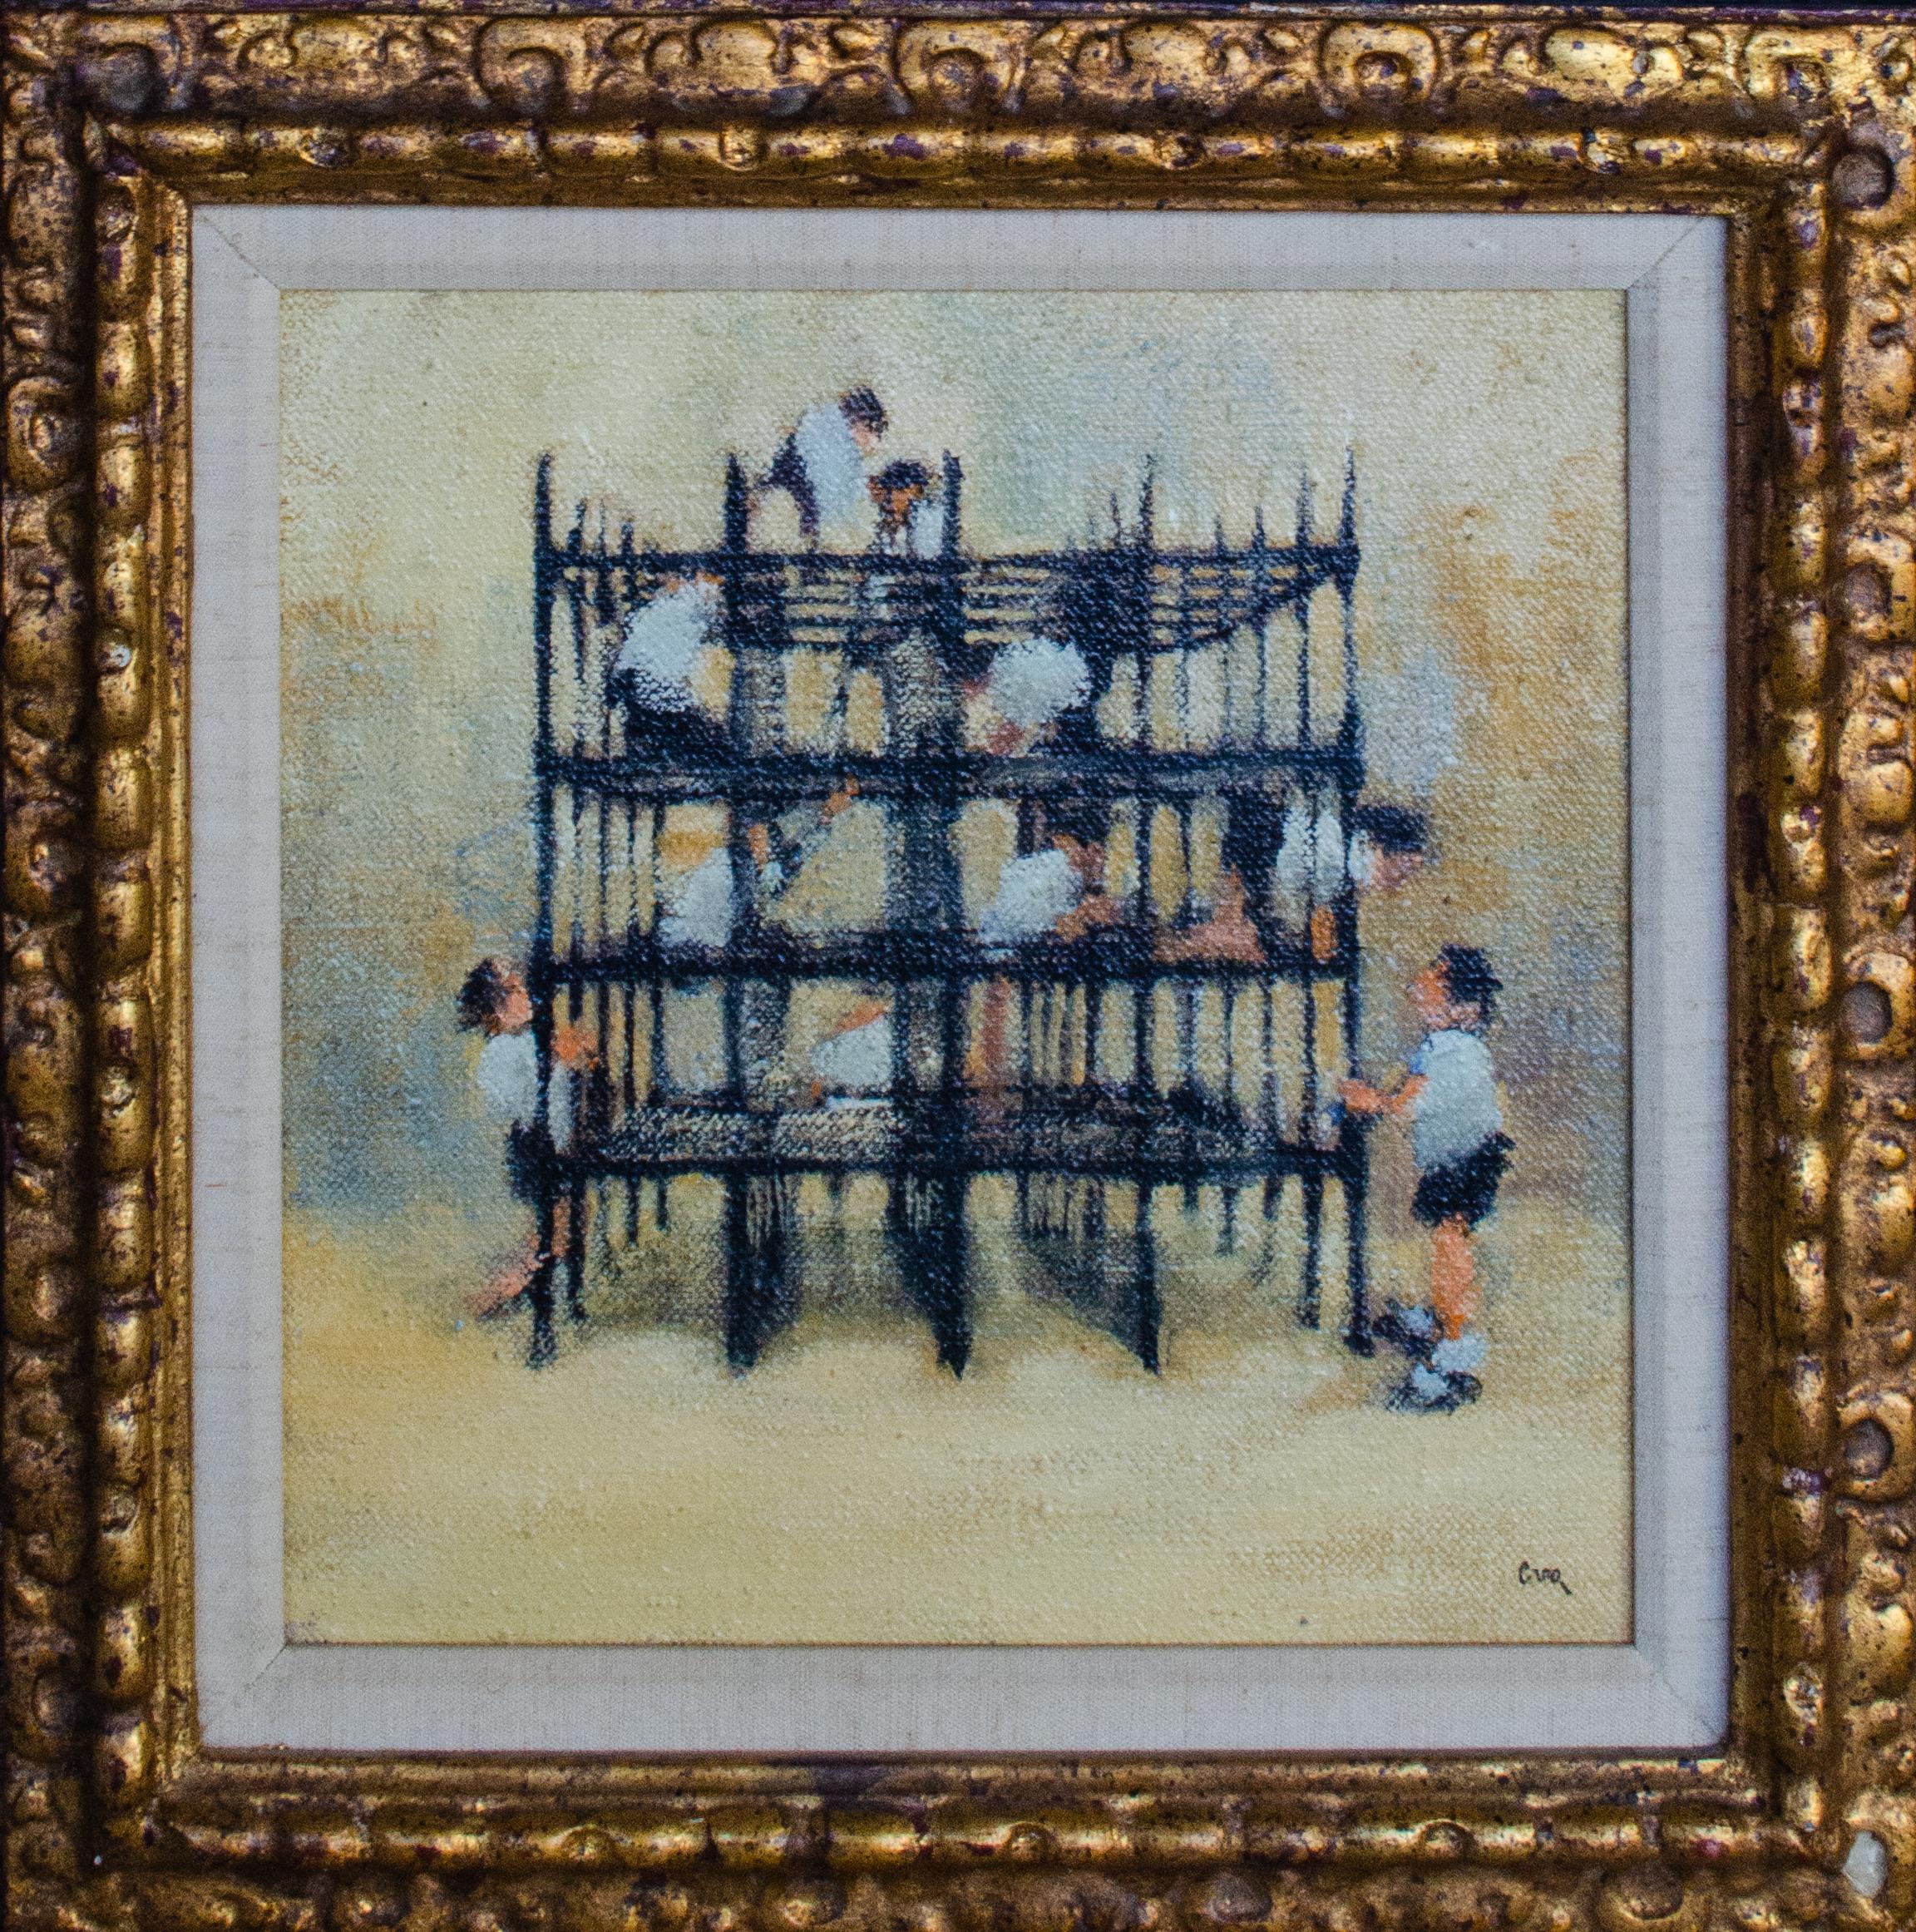 Leonard Creo (American, 1923-2019)
Children on Jungle Gym, c. 20th century
Oil on canvas
12 x 11 3/4 in. 
Signed lower right: Creo - 

Another version of this work can be found in the collection oft he Nasher Museum of Art at Duke University,